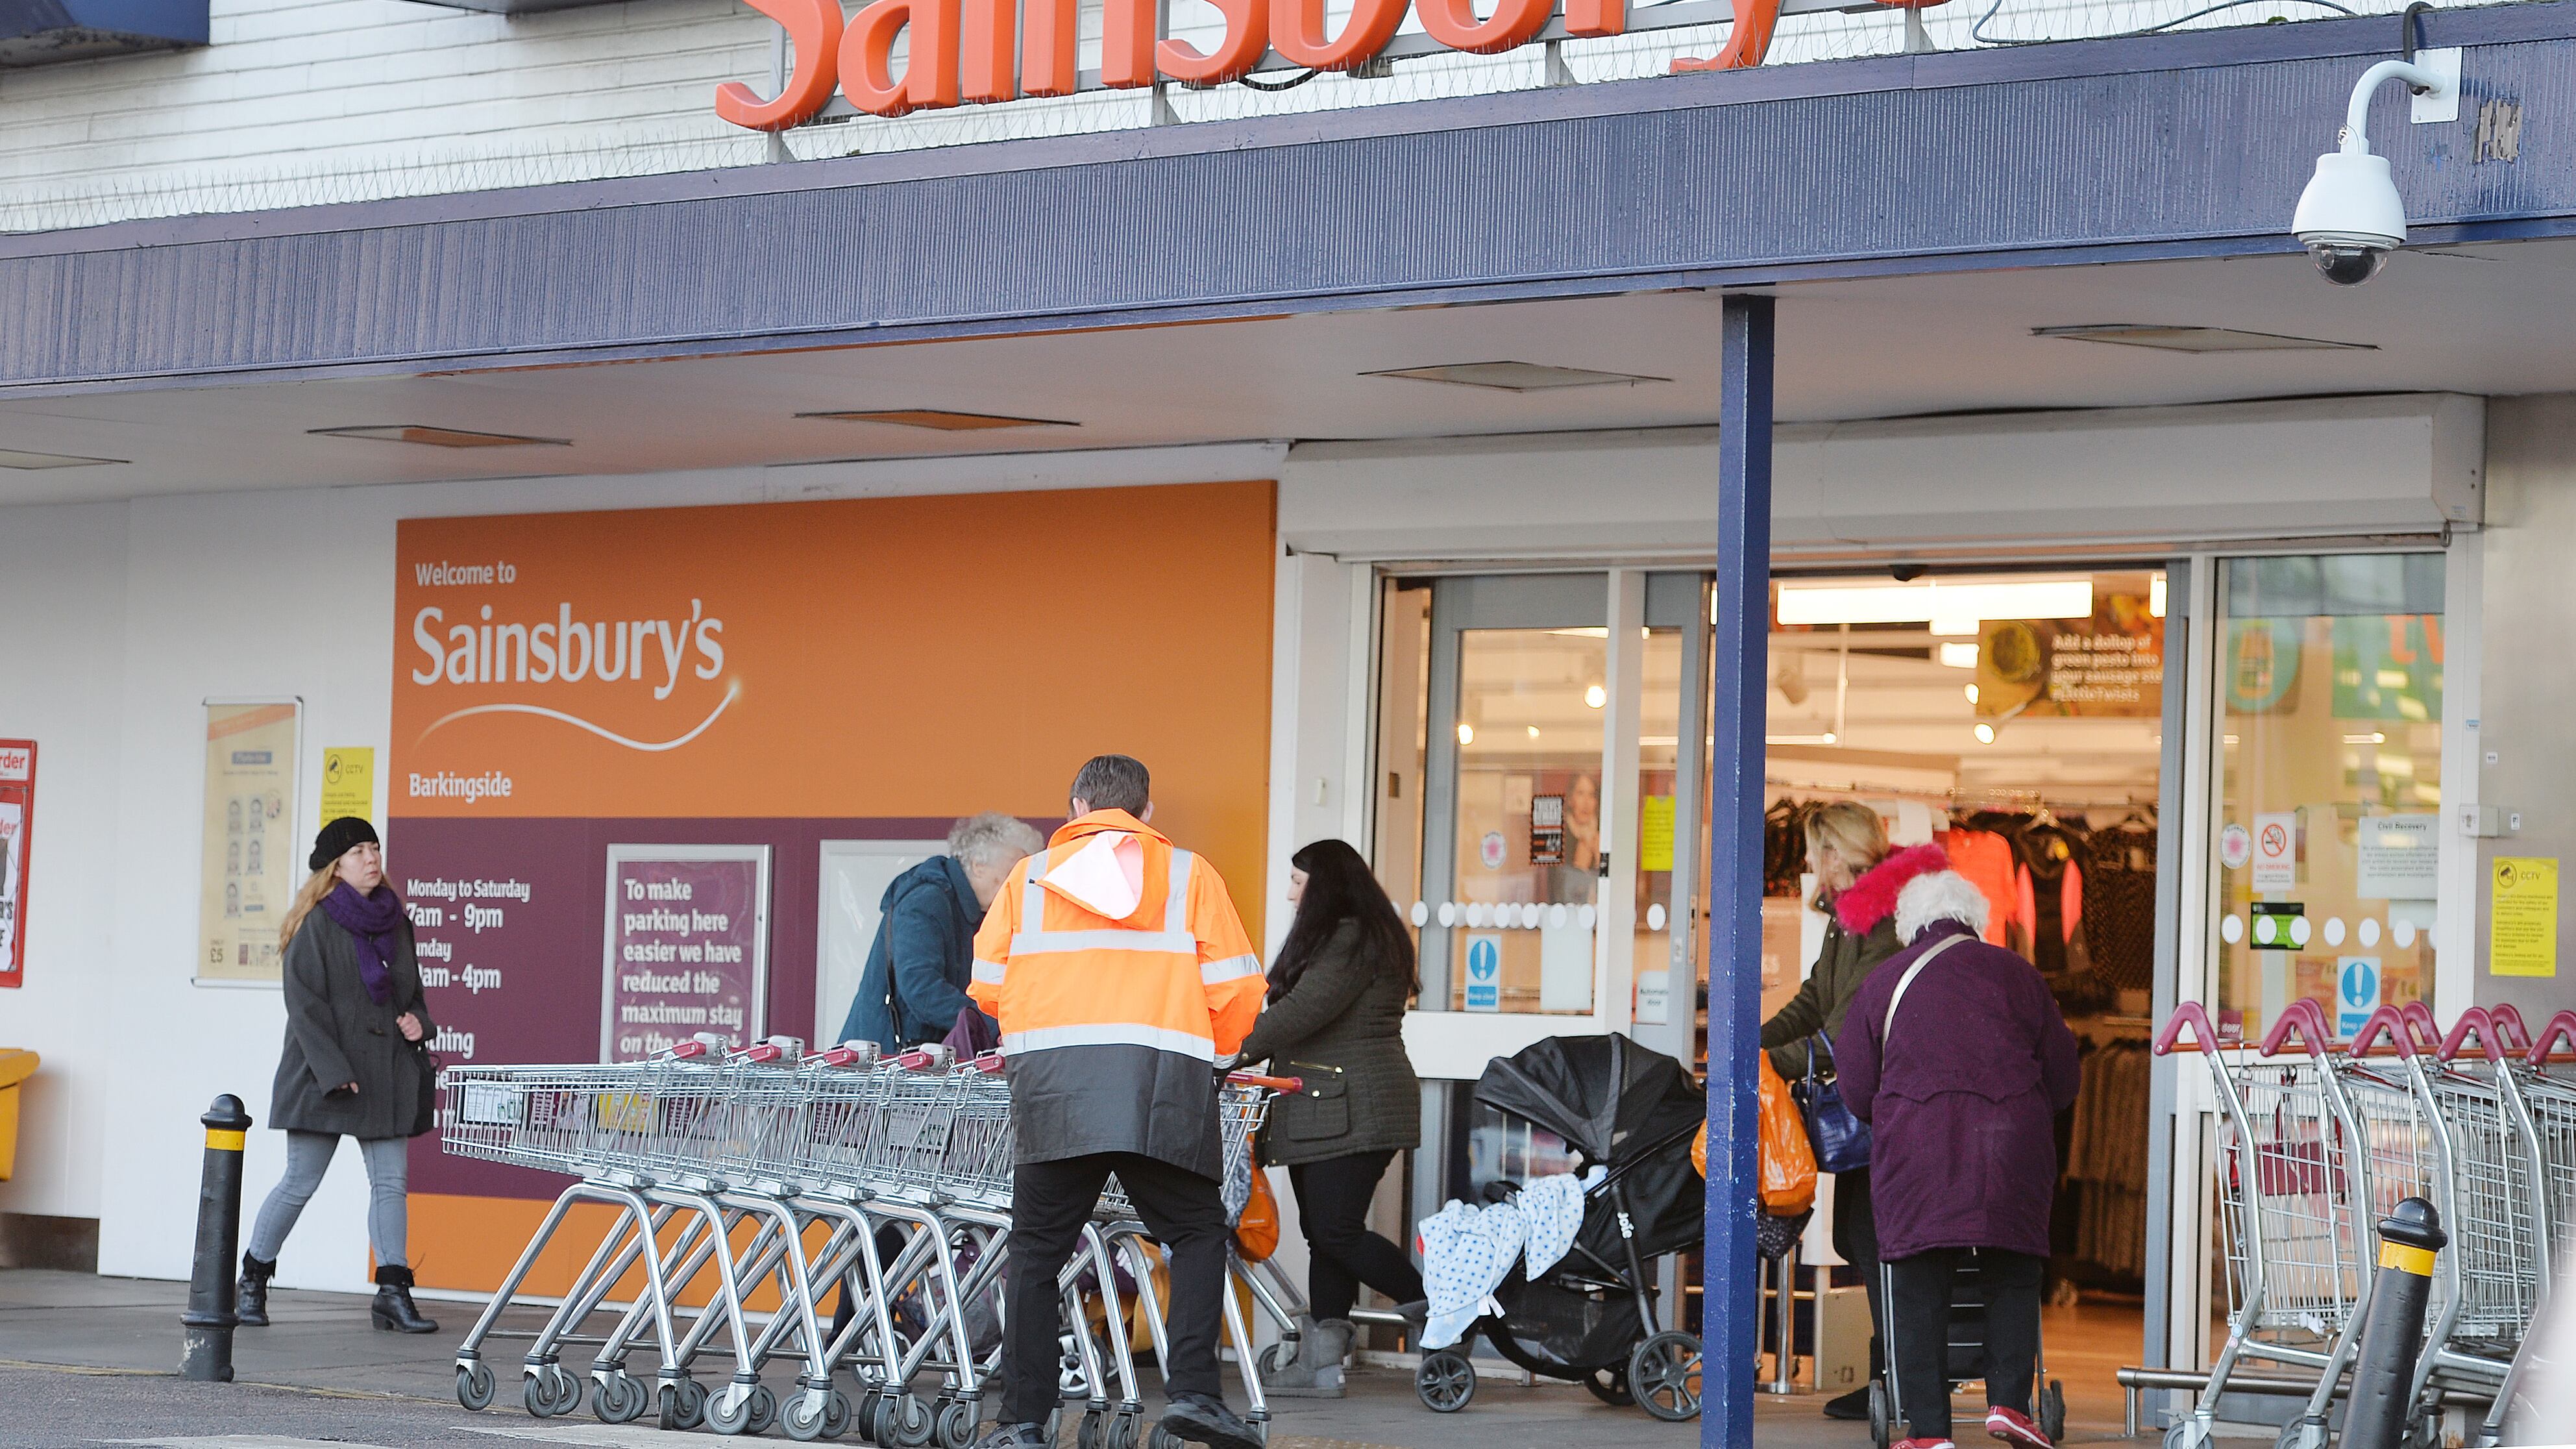 A handwritten sign outside a Sainsbury’s store in Cobham informing customers of technical issues affecting the supermarket chain